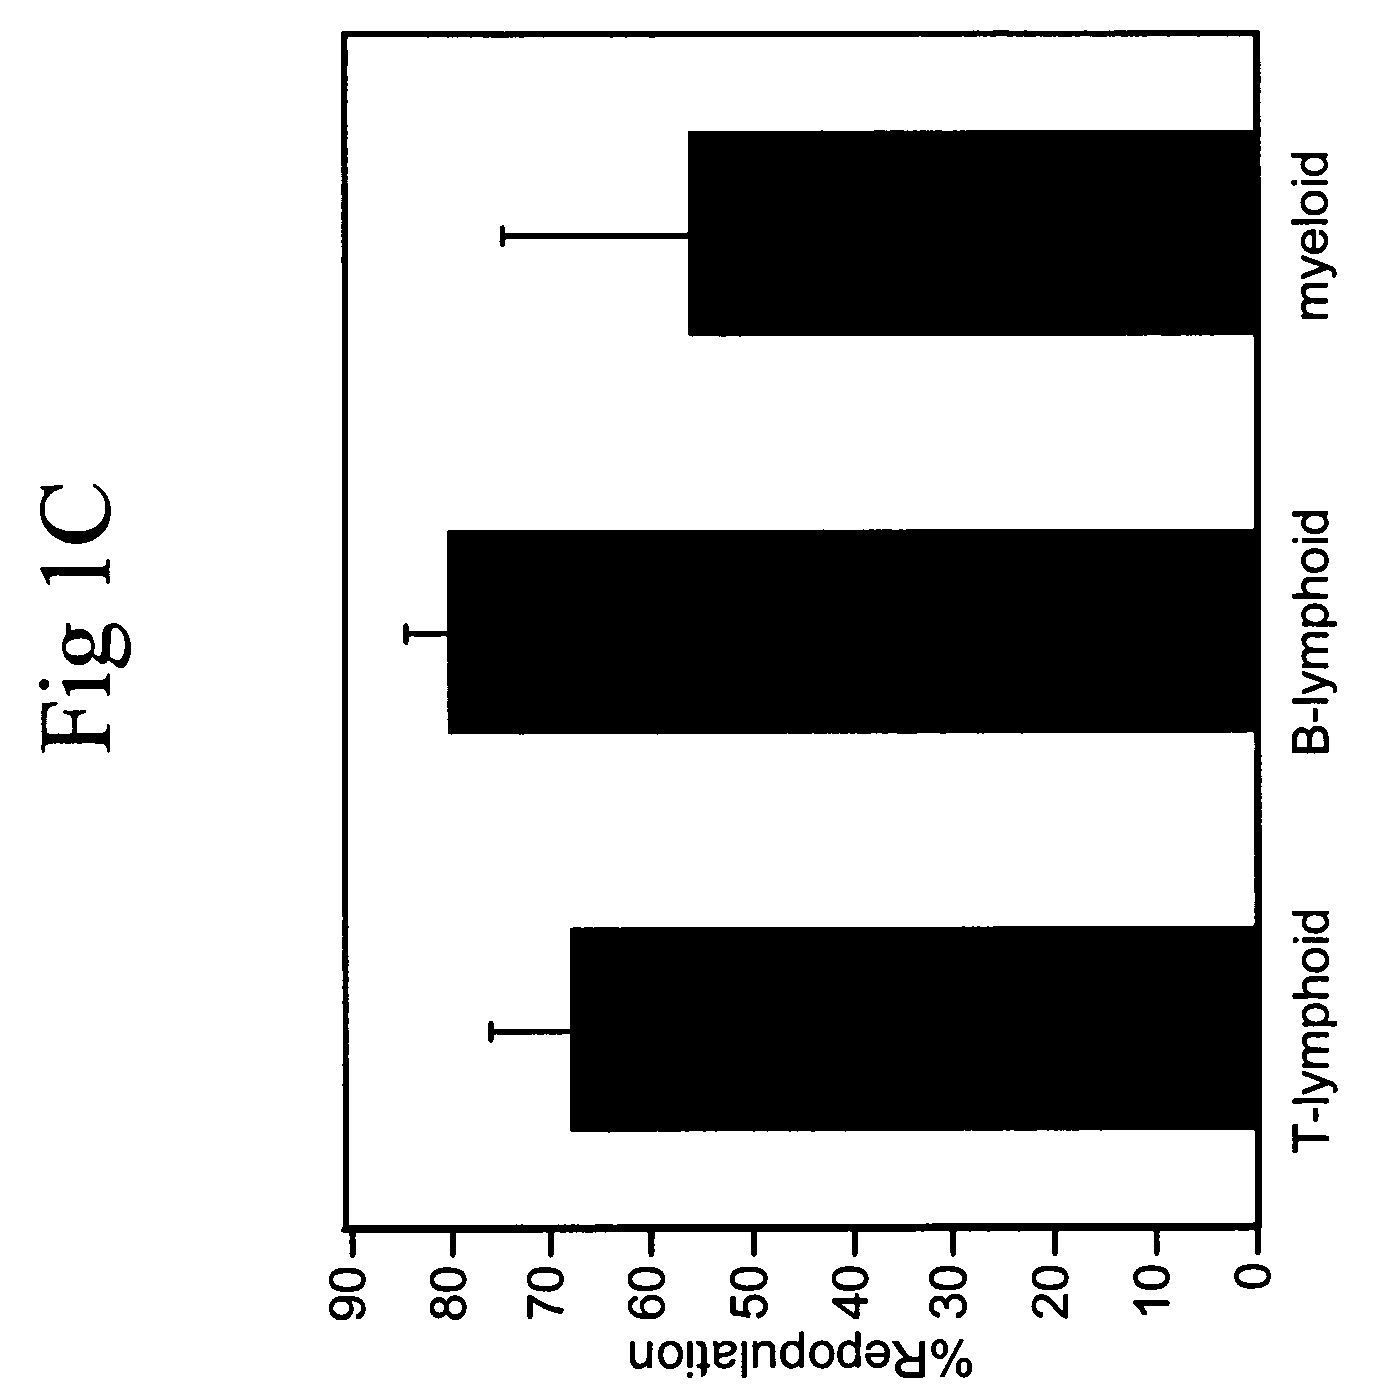 Cultured hematopoietic stem cells and method for expansion and analysis thereof